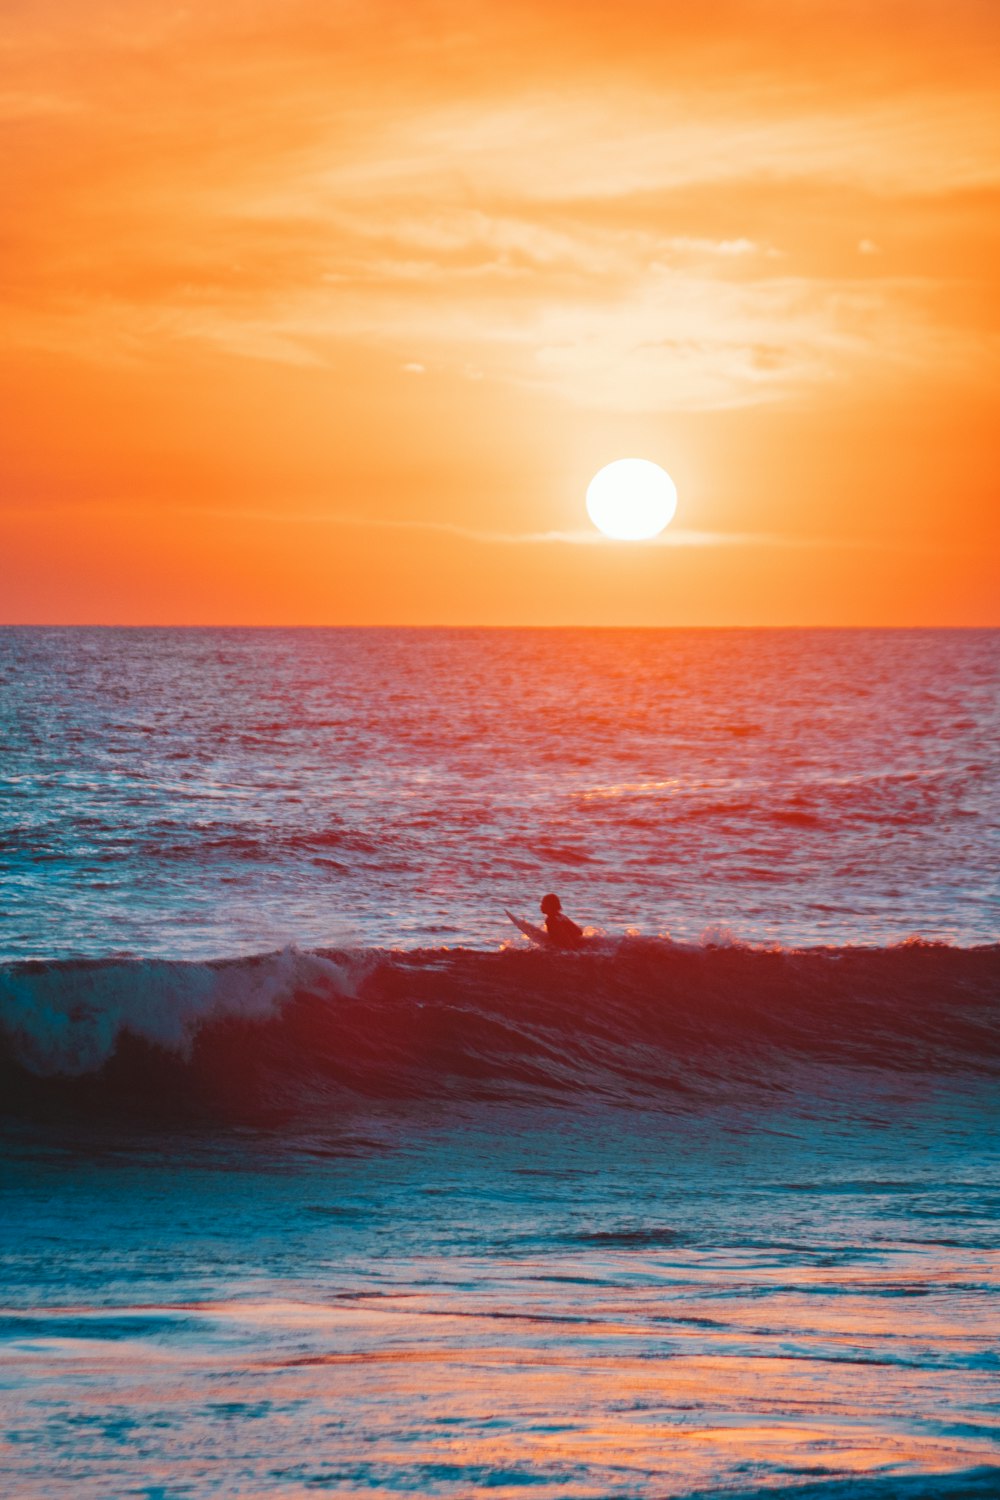 a person riding a surfboard on a wave at sunset